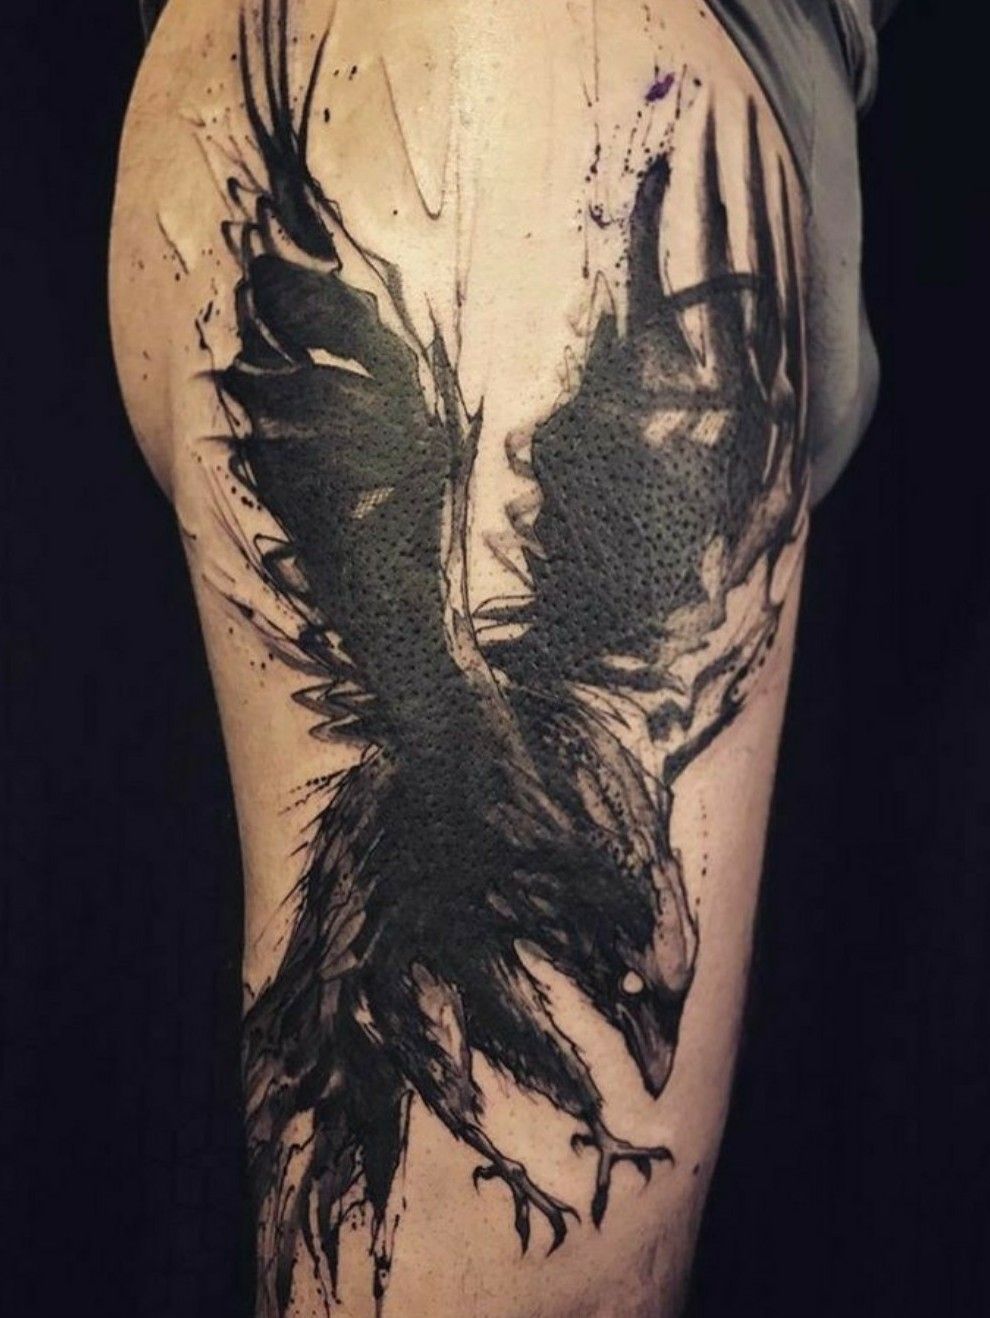 Electric Ink on Twitter Painterly style raven with geometric elements  Artist Freddy Payne watercolor painterlystyle tattoo geometric raven  httpstcoQpNgOdRIlD  X